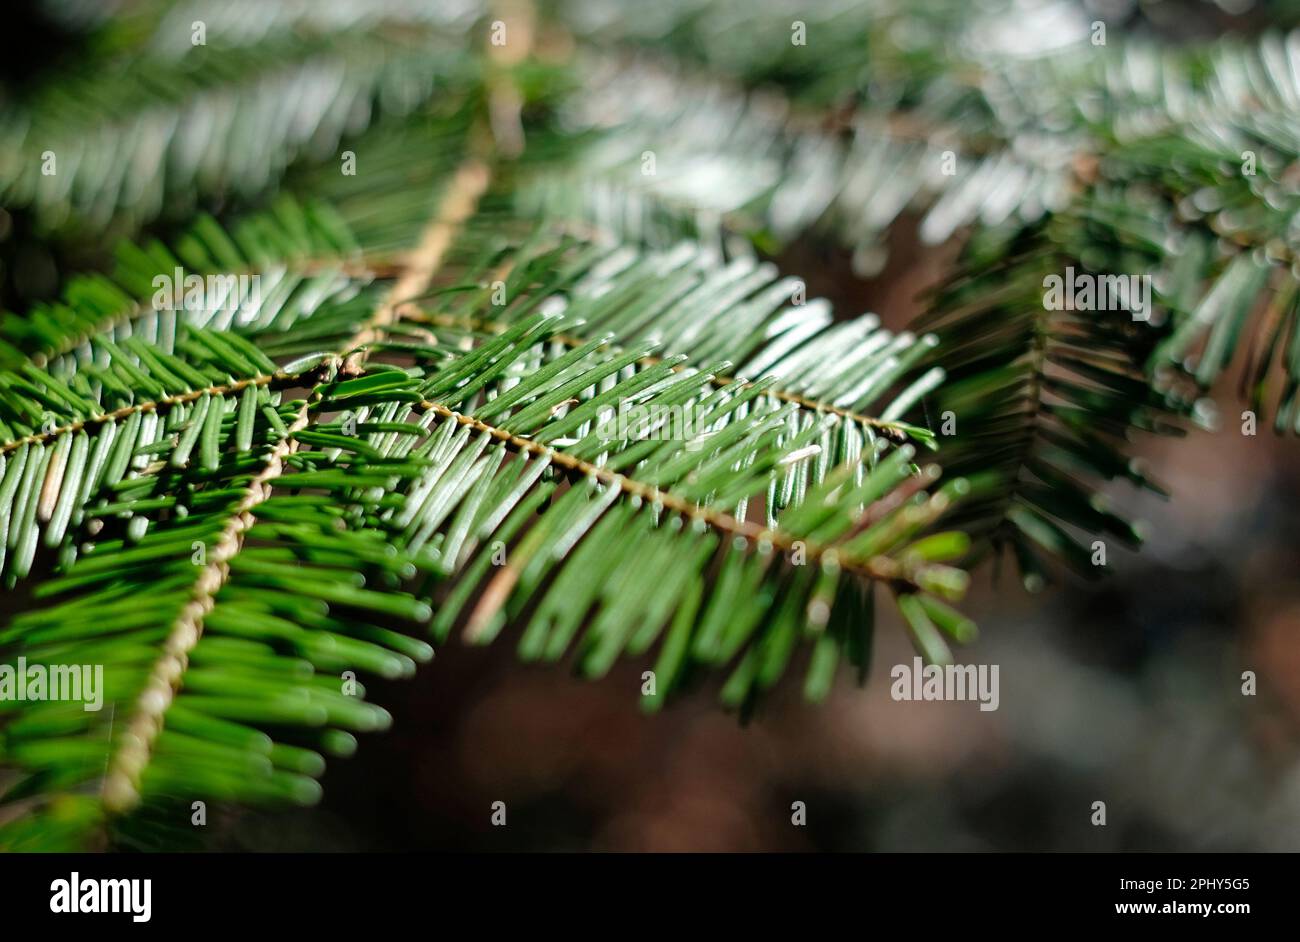 close up of fir tree needles in woodland setting Stock Photo